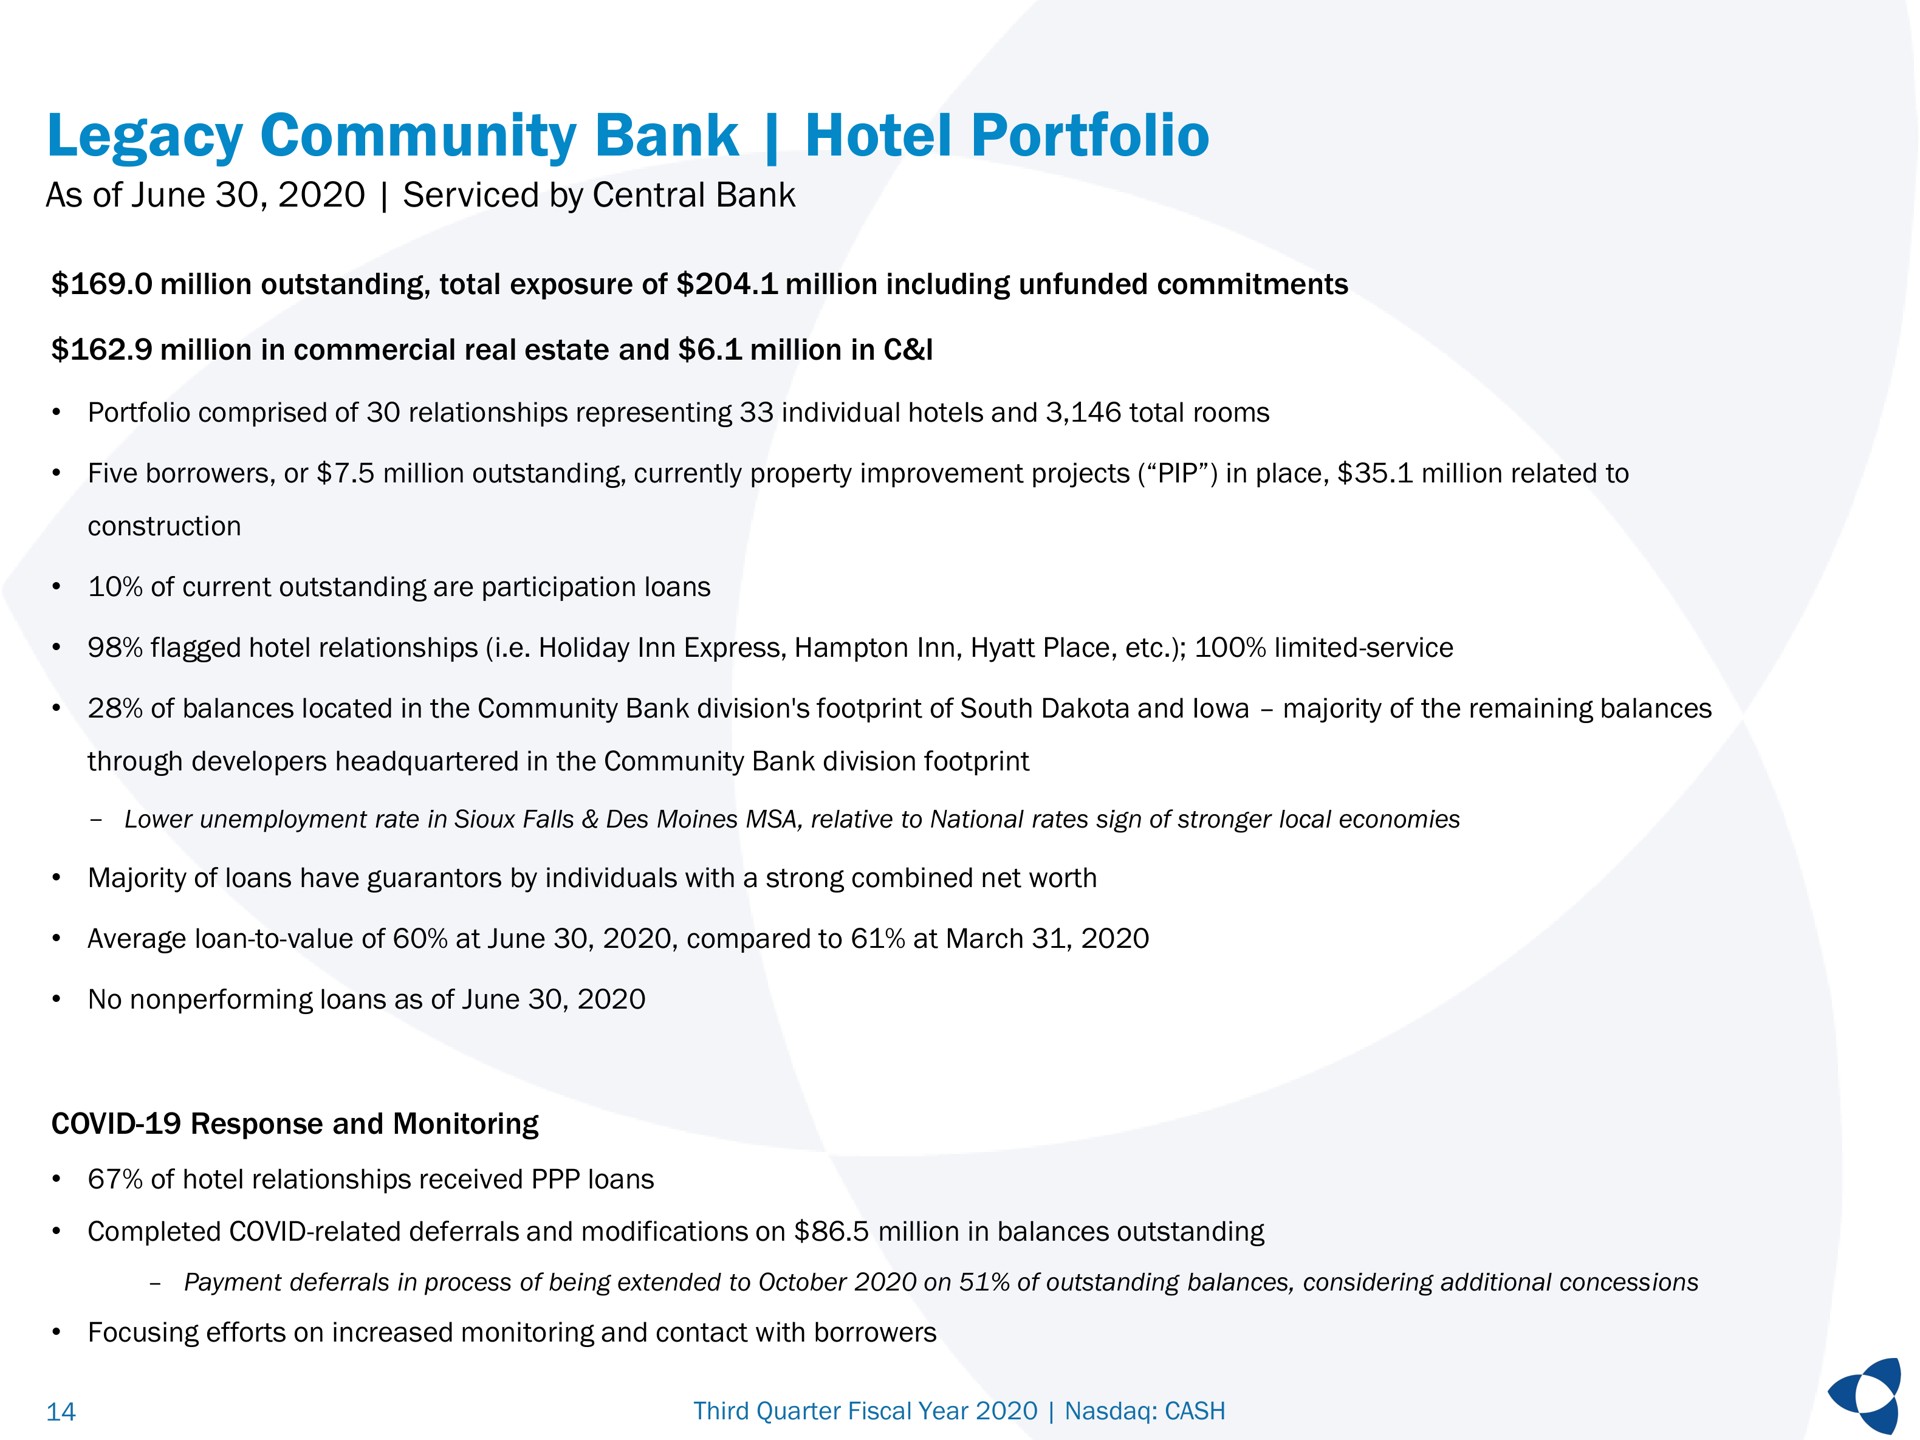 legacy community bank hotel portfolio as of june serviced by central bank | Pathward Financial